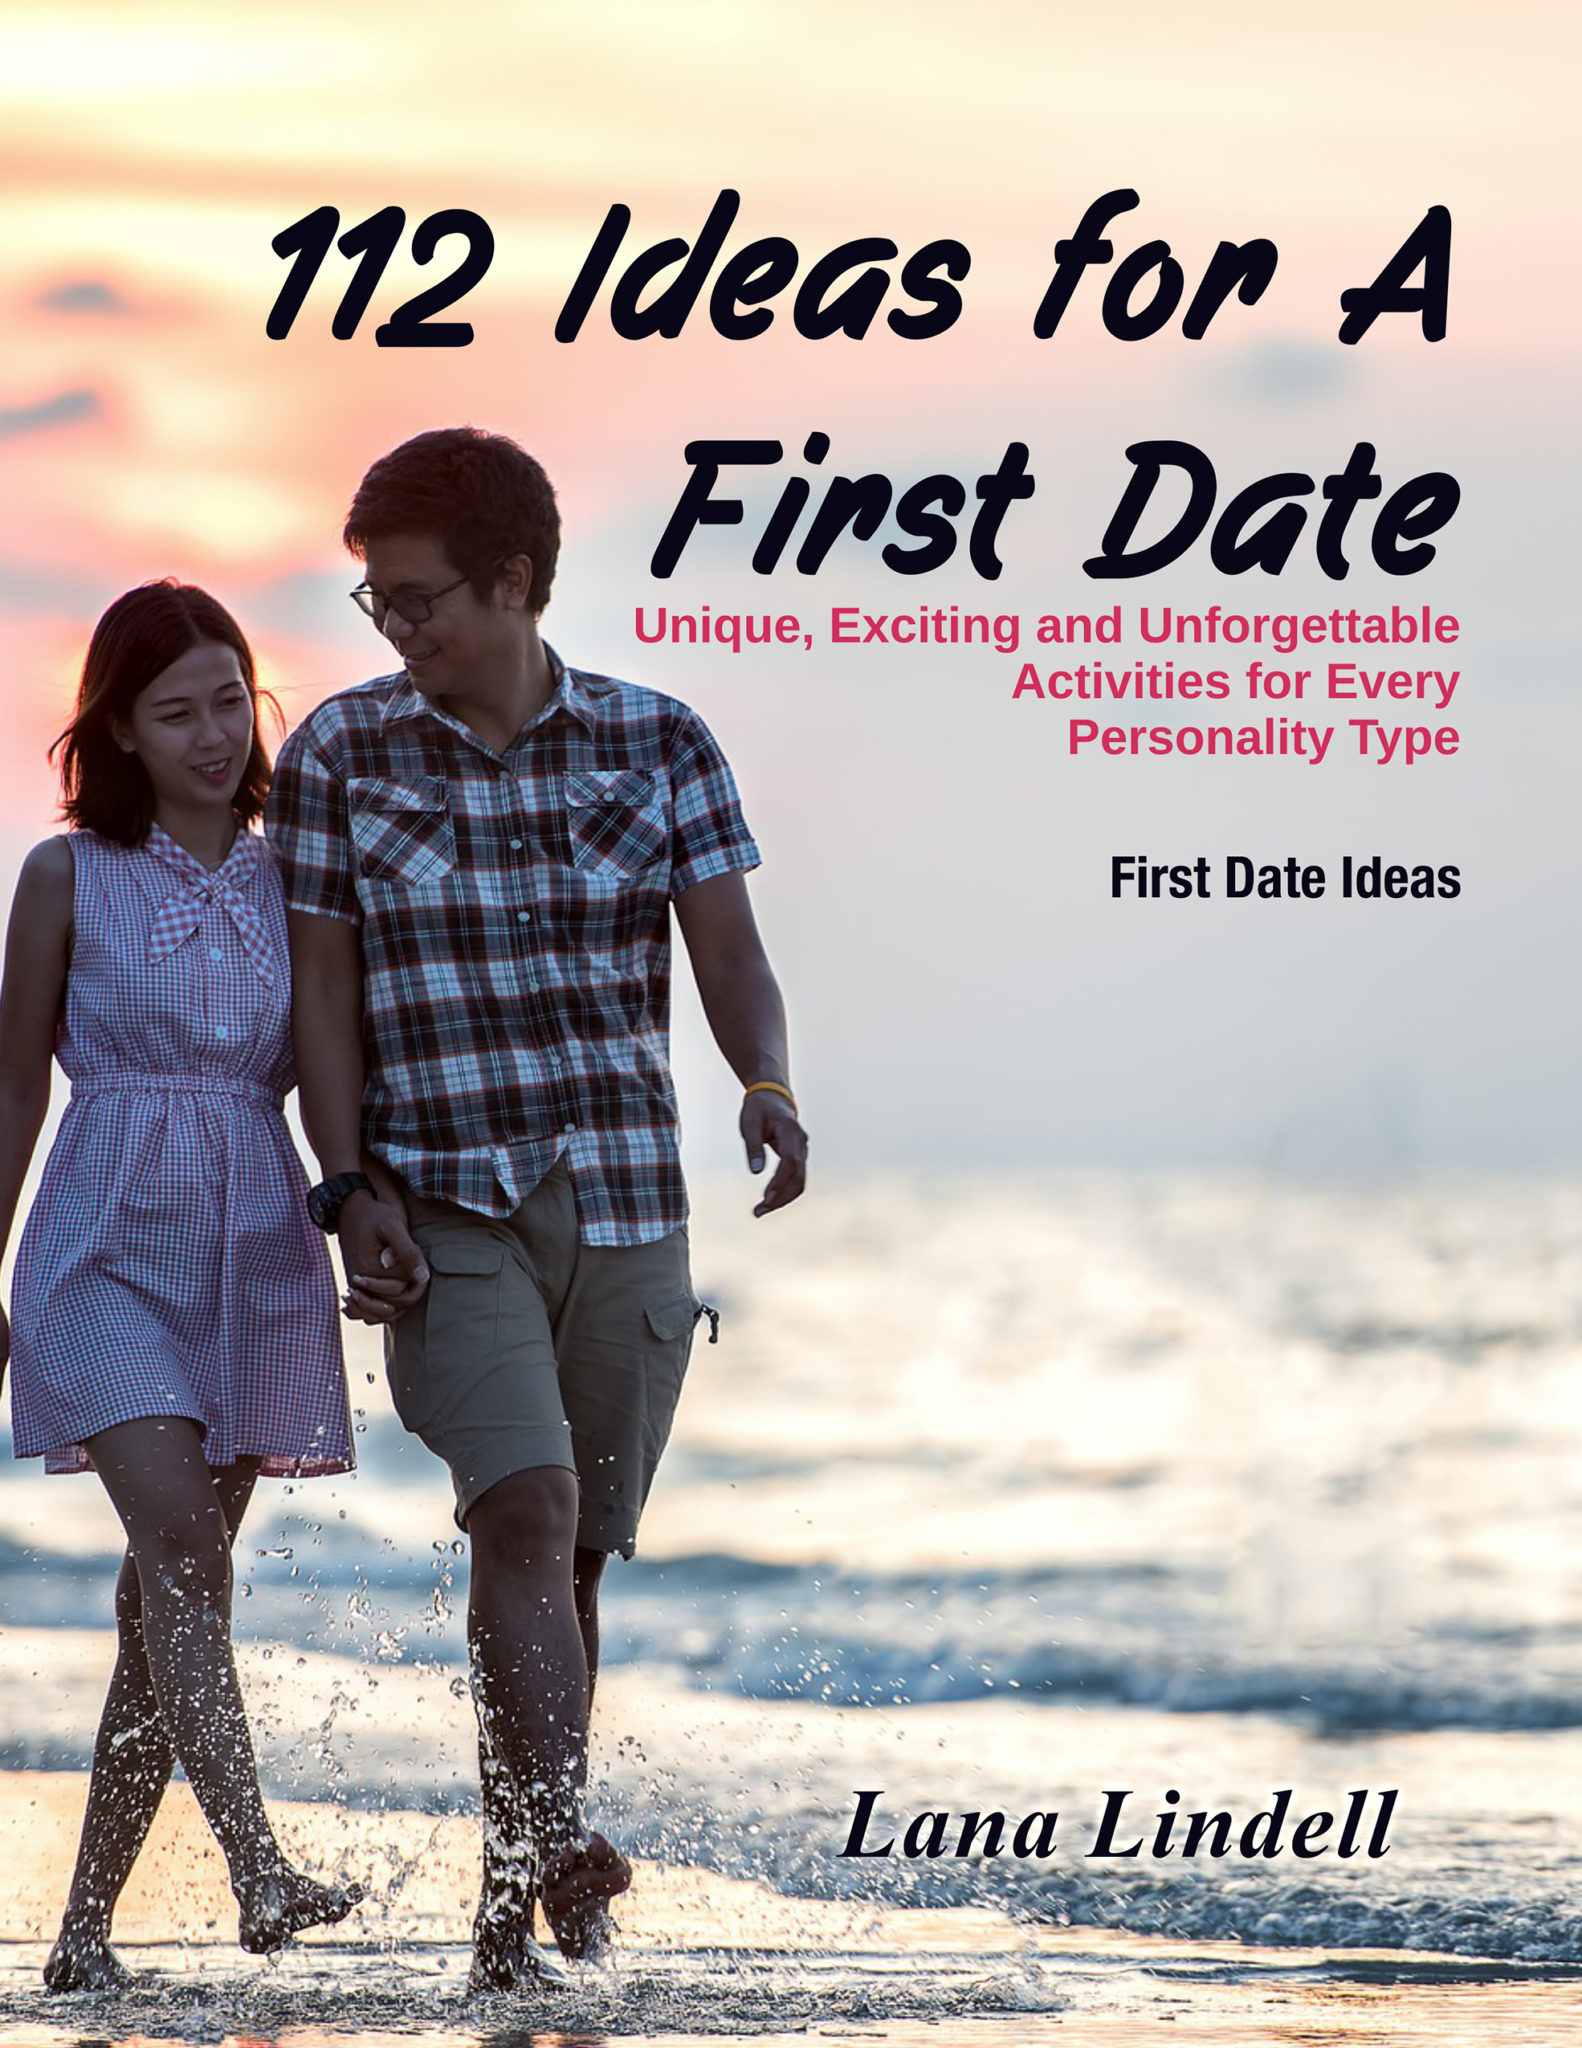 FREE: 112 Ideas for a First Date by Linda Lindell